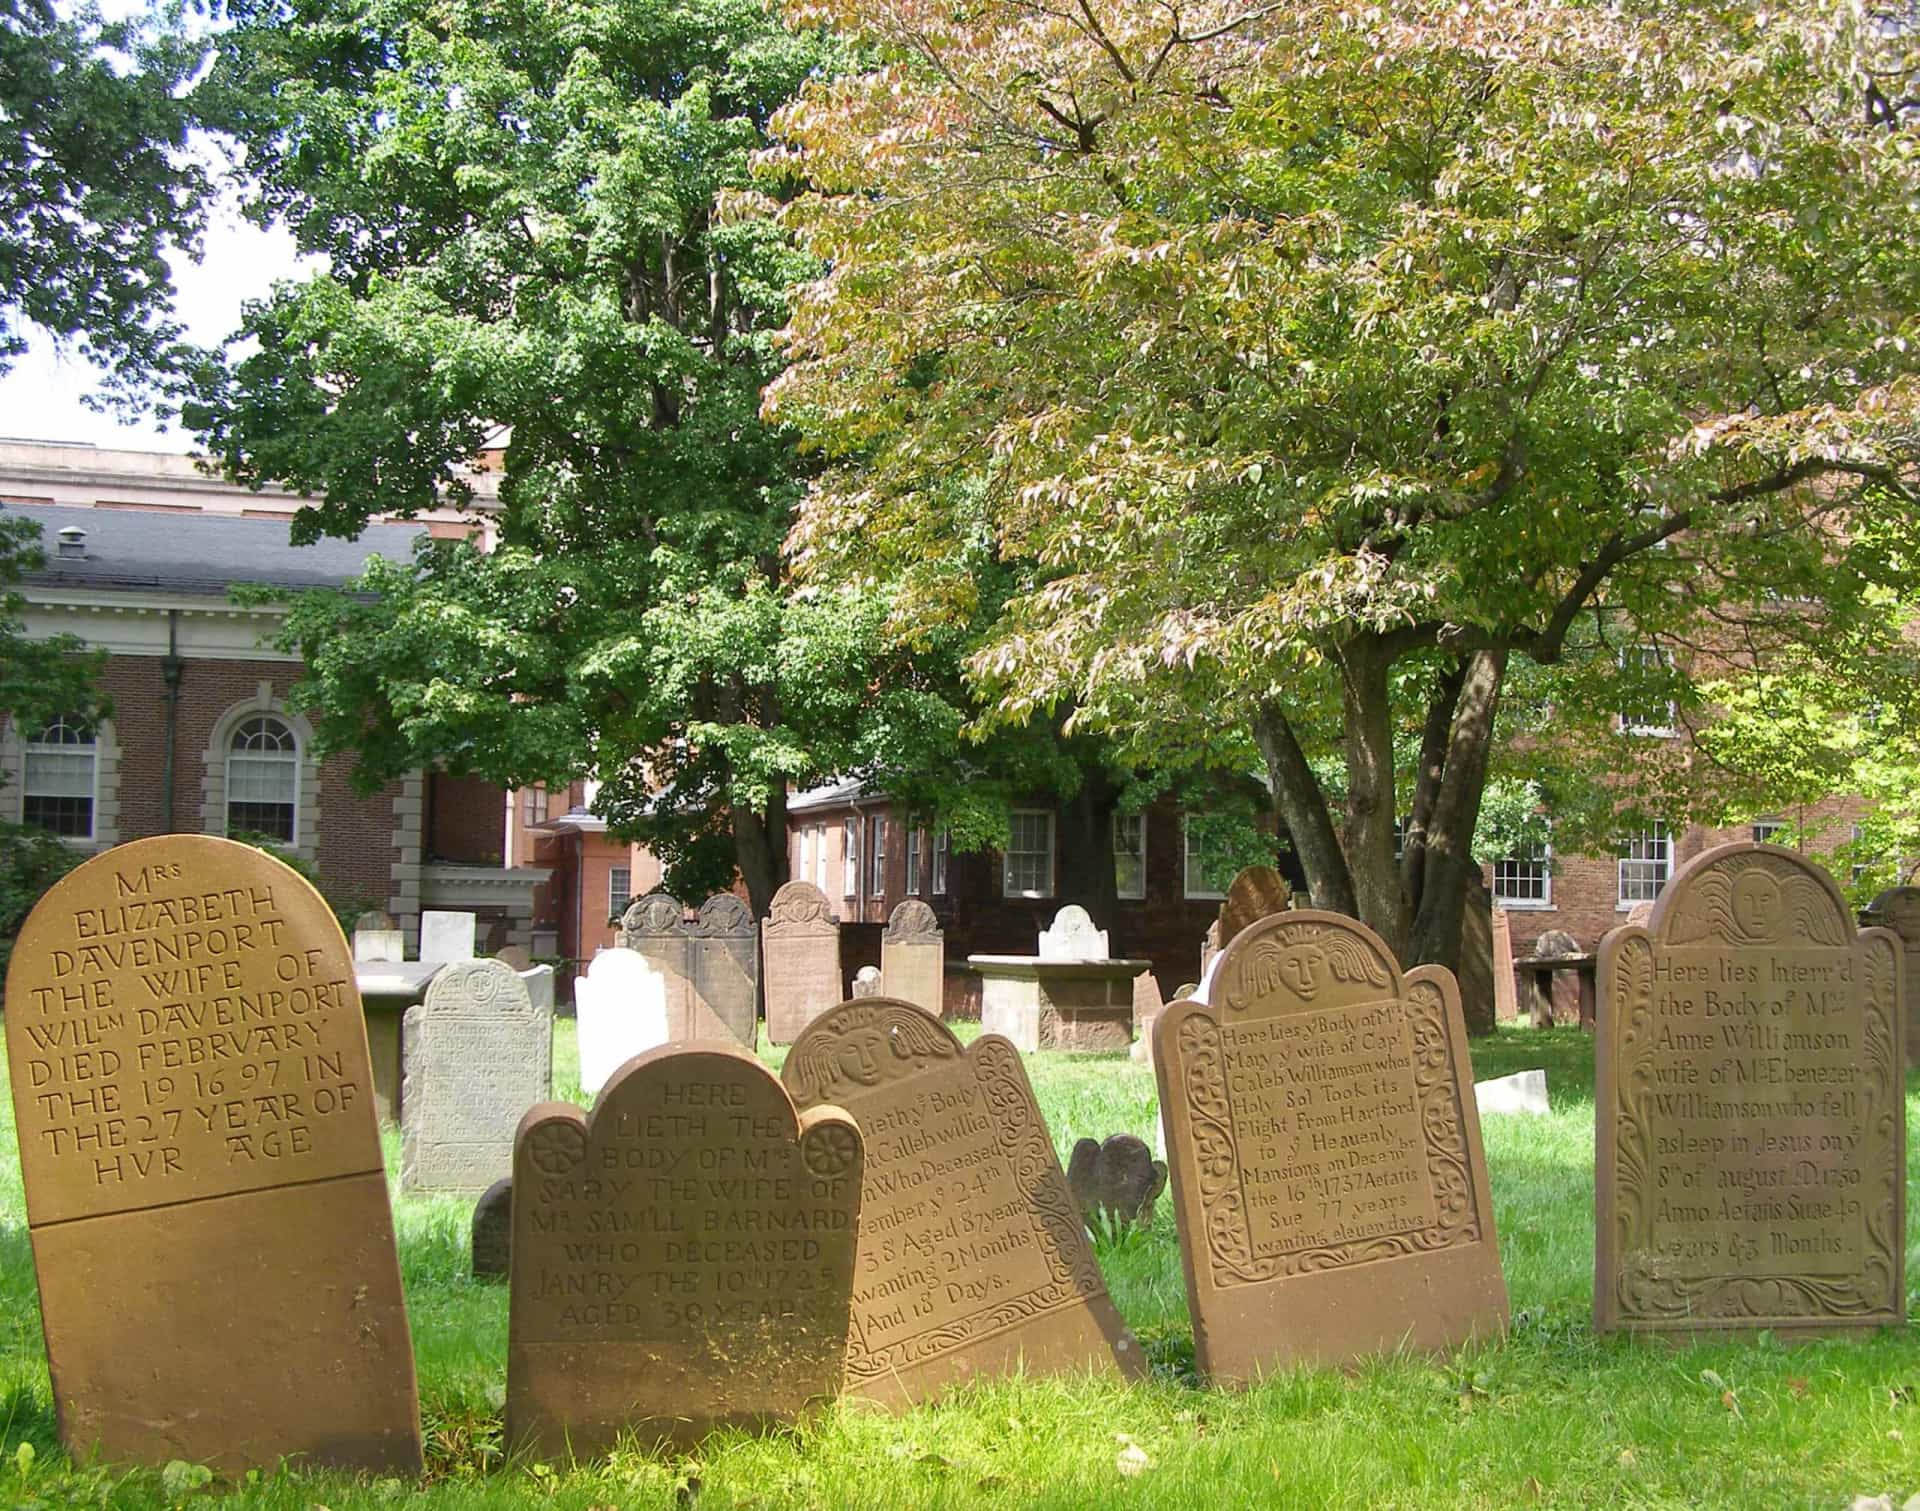 <p>One of Hartford's more incongruous visitor attractions is the city's Ancient Burying Ground, a cemetery set adjacent to the First Church of Christ and dating back to the 1600s. In fact, it is the only complete cemetery to survive from that period: the oldest gravestone dates back to 1648.</p><p>You may also like: <a href="https://www.starsinsider.com/n/340467?utm_source=msn.com&utm_medium=display&utm_campaign=referral_description&utm_content=513982en-us">Older actors who played teenagers on-screen</a></p>